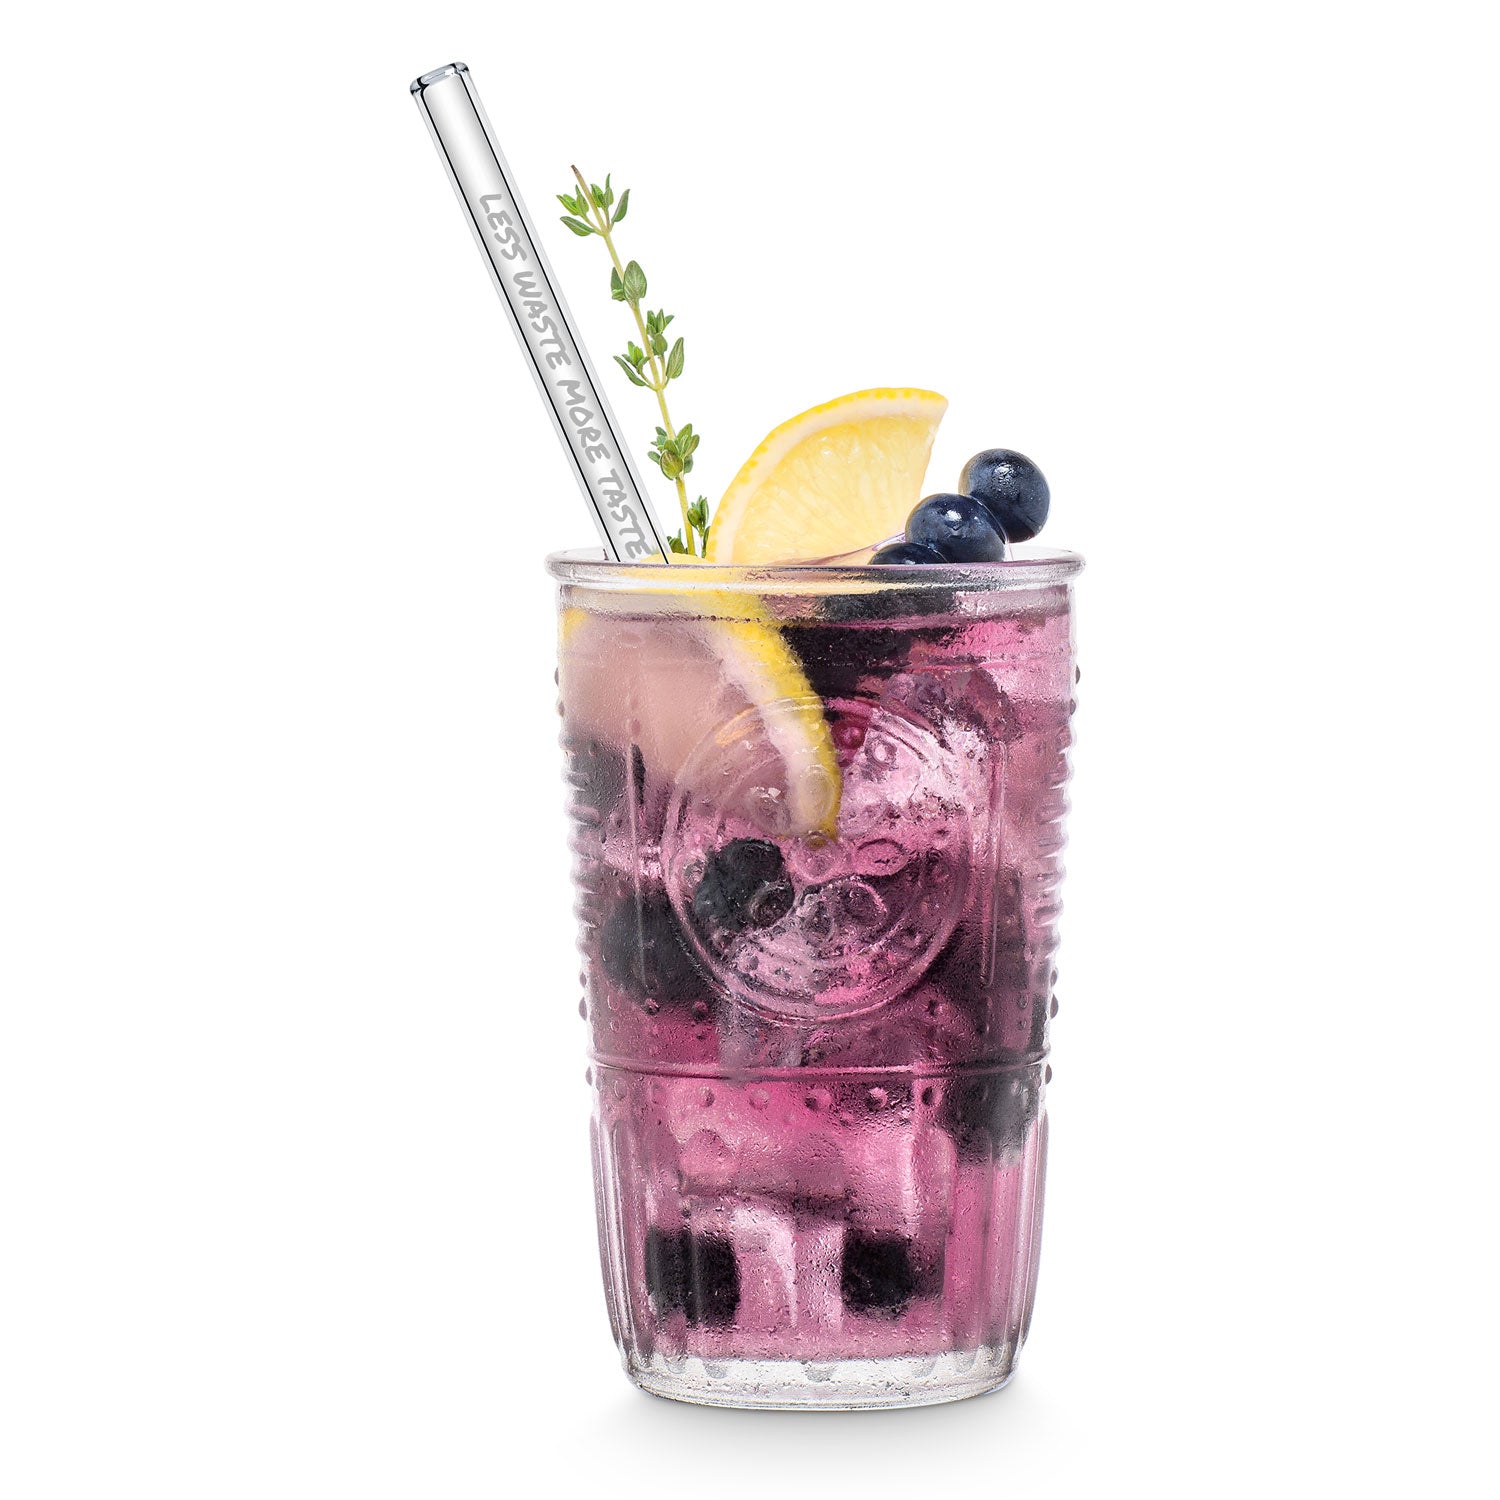 https://cdn.shopify.com/s/files/1/0250/9049/0473/files/less-waste-more-taste-quote-glass-straws-save-the-turtles-plastic-free-future-products-to-reduce-plastic-waste-HALM.jpg?v=1605538138